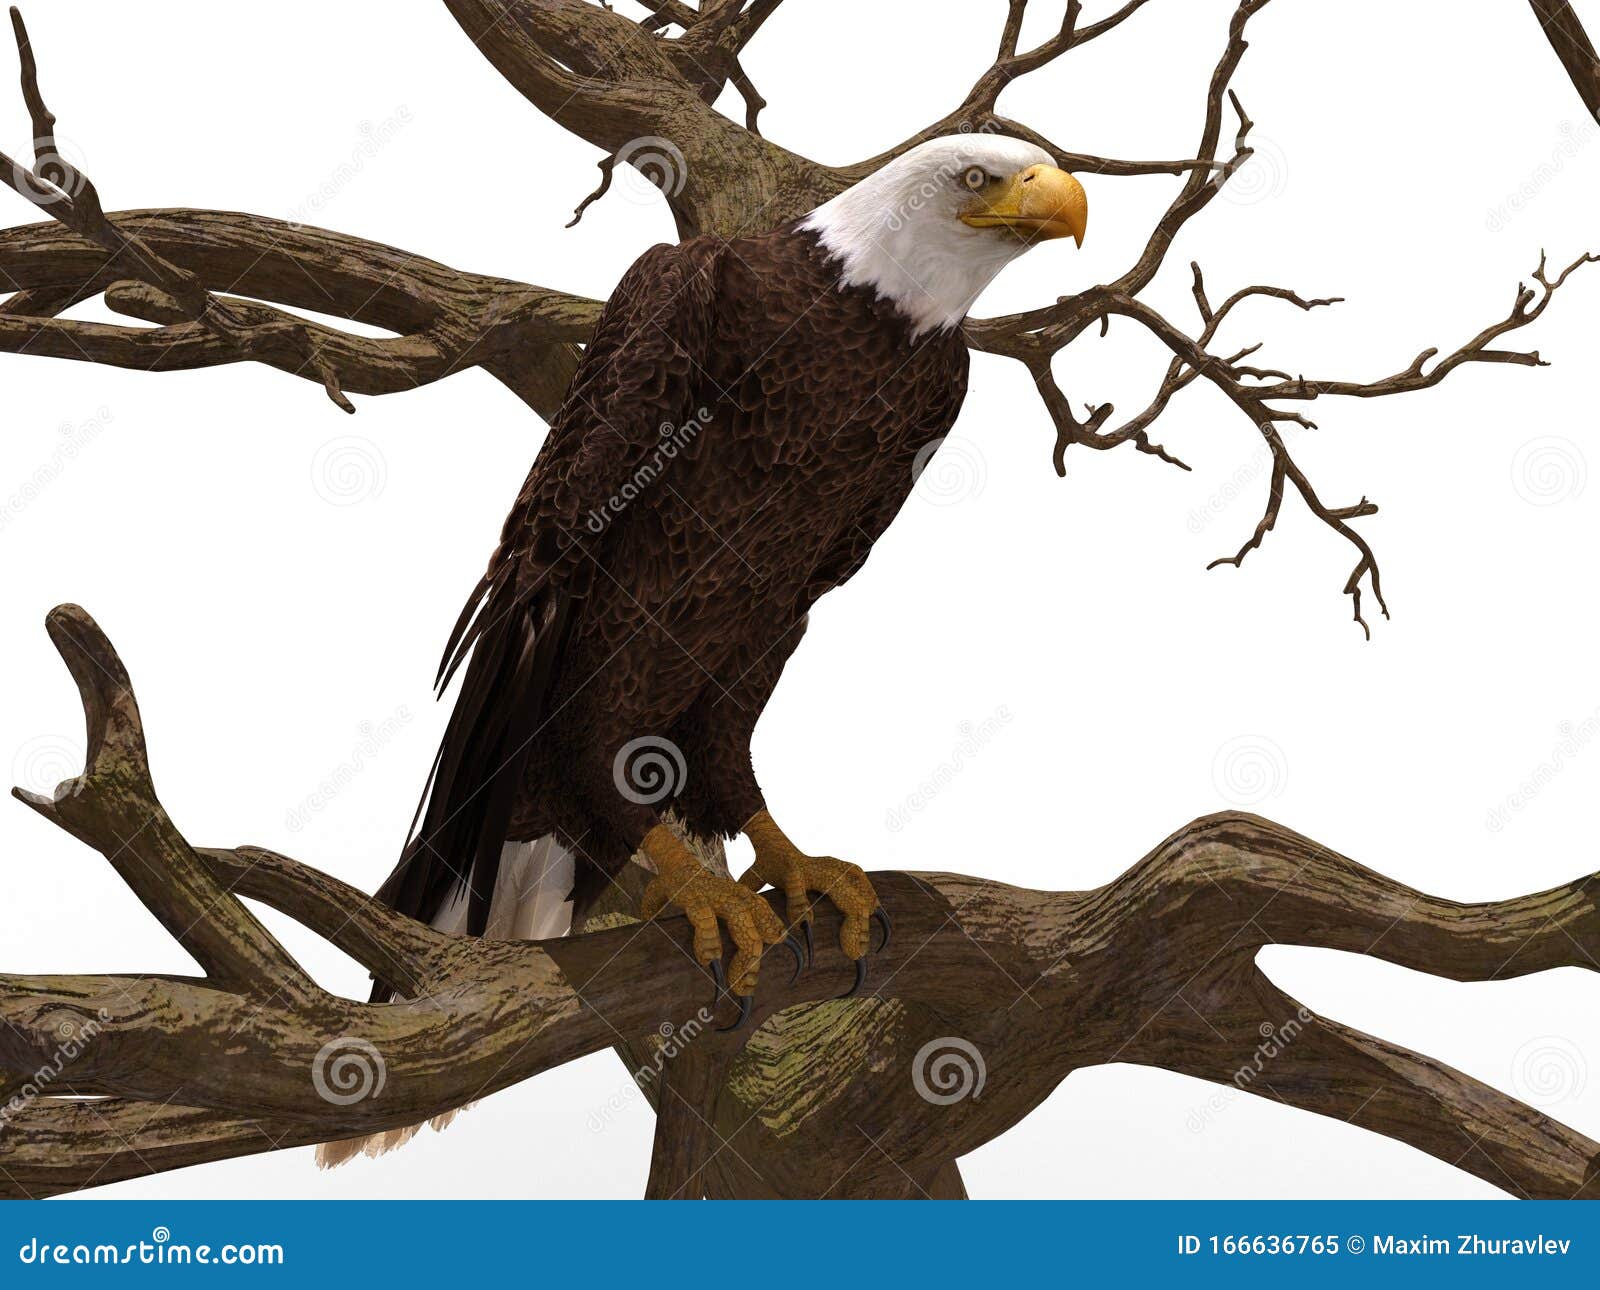 Bald Eagle Sitting On A Tree Branch Isolated On White 3d